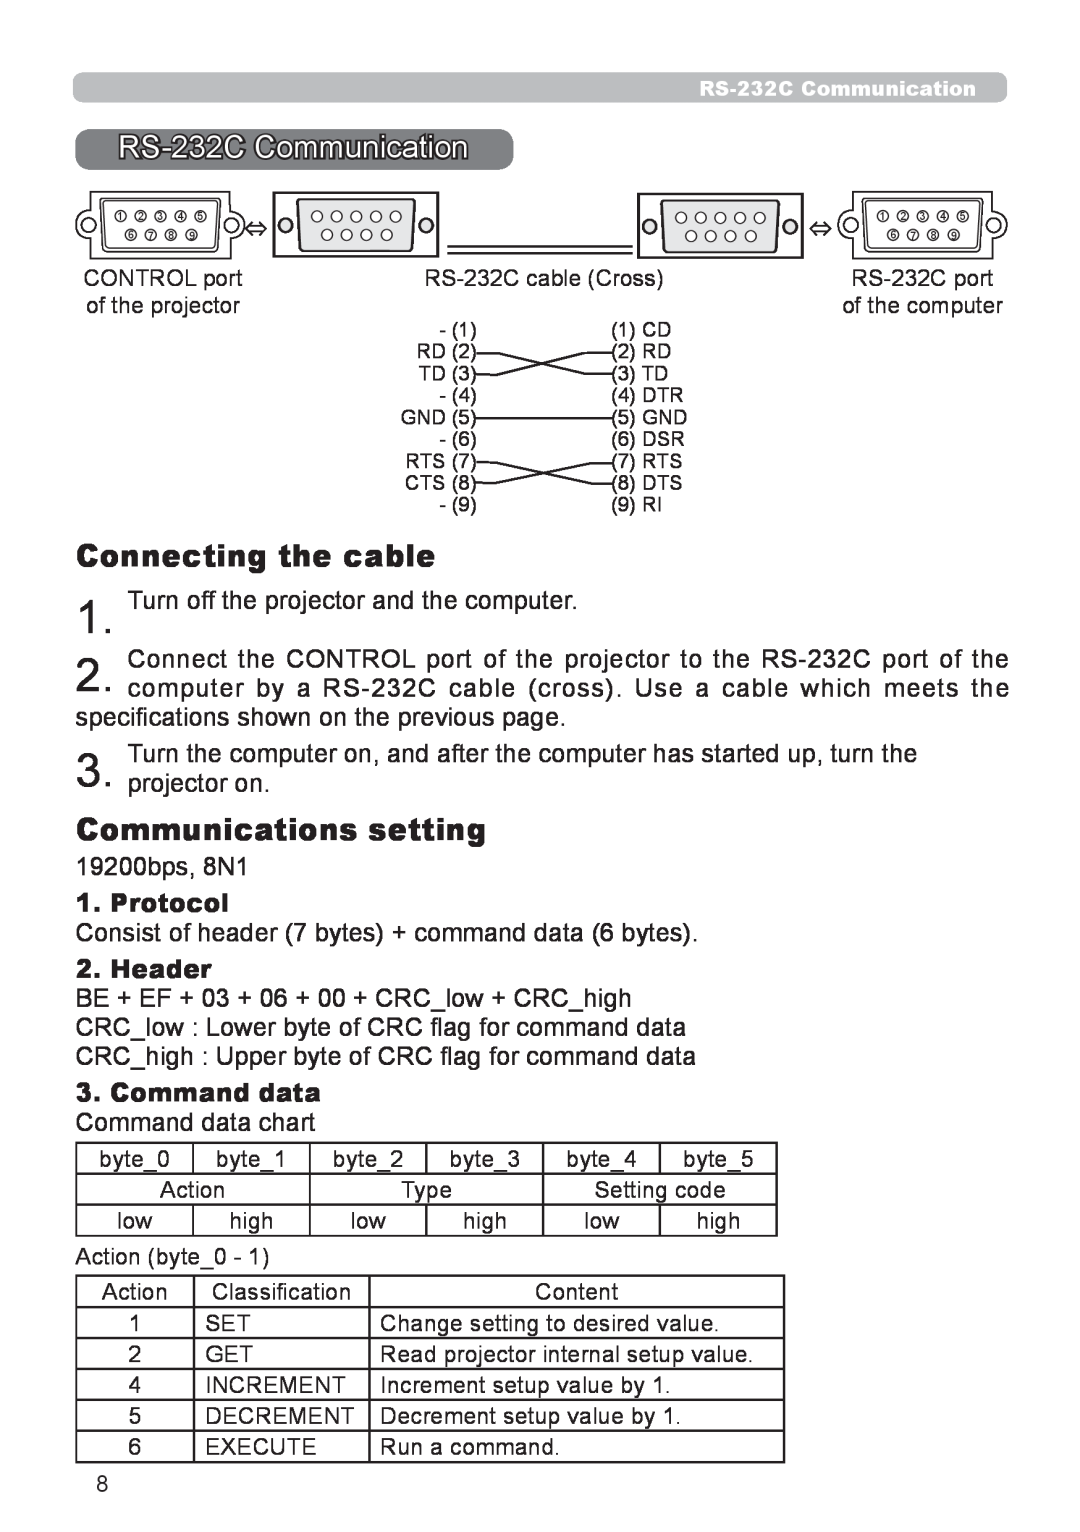 InFocus IN5542C RS-232C Communication, Connecting the cable, Communications setting, Protocol, Header, Command data 